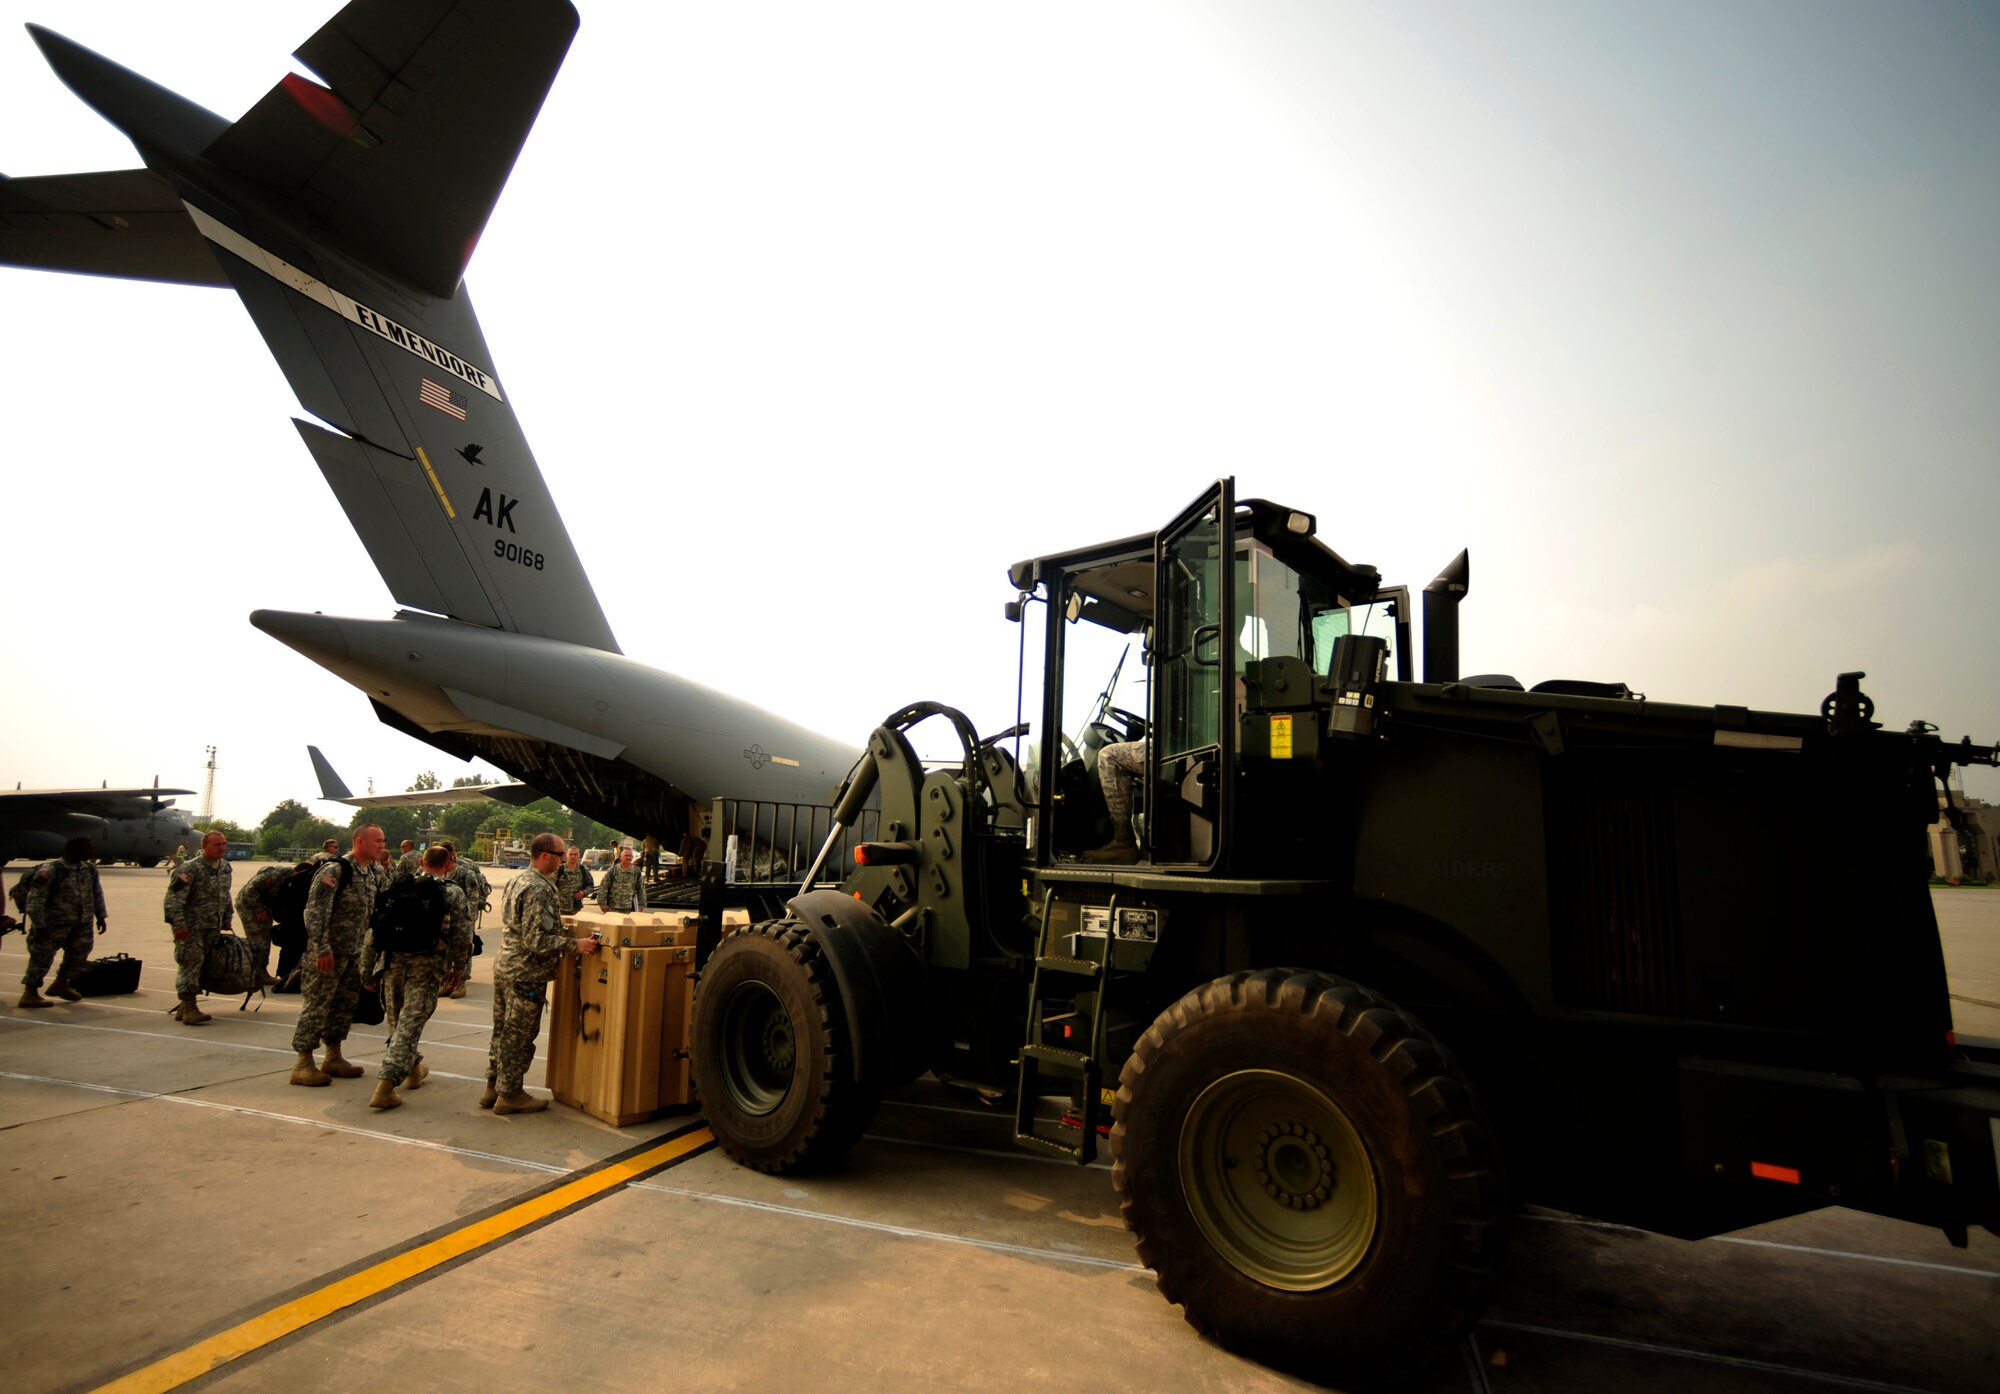 U.S. Army soldiers from the 16th Combat Aviation Brigade, Ft. Wainwright, Ak arrive to Chaklala Air Force Base, Pakistan aboard a C-17 Globemaster III aircraft in support of flood relief efforts on Sept. 1, 2010. The 16th CAB also brought two UH-60 Blackhawk helicopters along with personnel.
(U.S. Air Force photo by Staff Sgt. Andy M. Kin / Released)